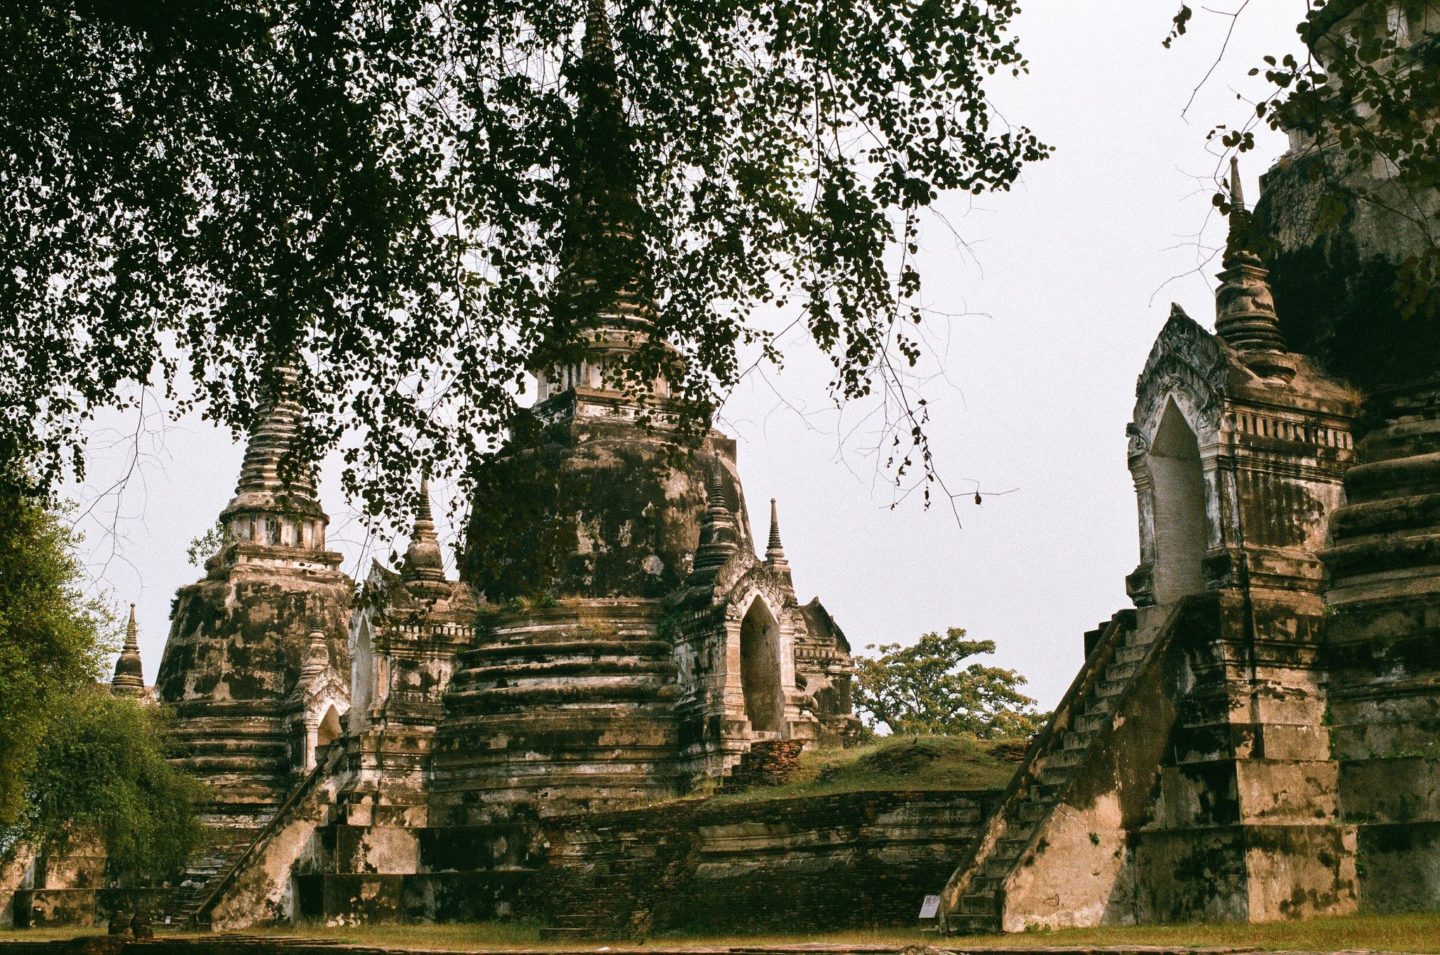 Wat Phra Si Sanphet or The Old Royal Palace